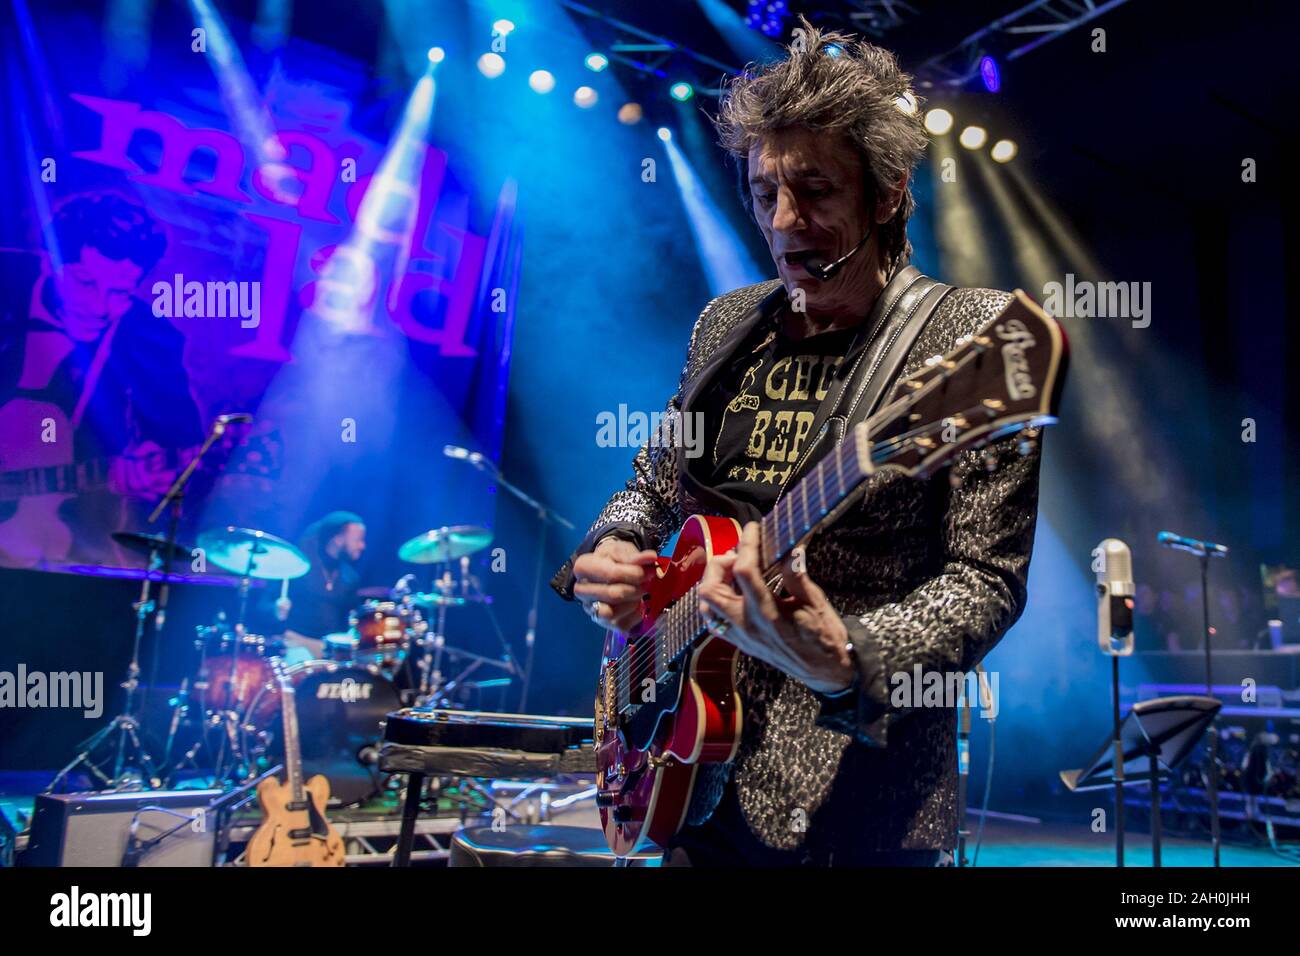 LONDON, ENGLAND: Rolling Stones guitarist Ronnie Wood performs during his "Mad  Lad: A Live Tribute To Chuck Berry" show at the Shepherds Bush Empire.  Featuring: Ronnie Wood Where: London, United Kingdom When: